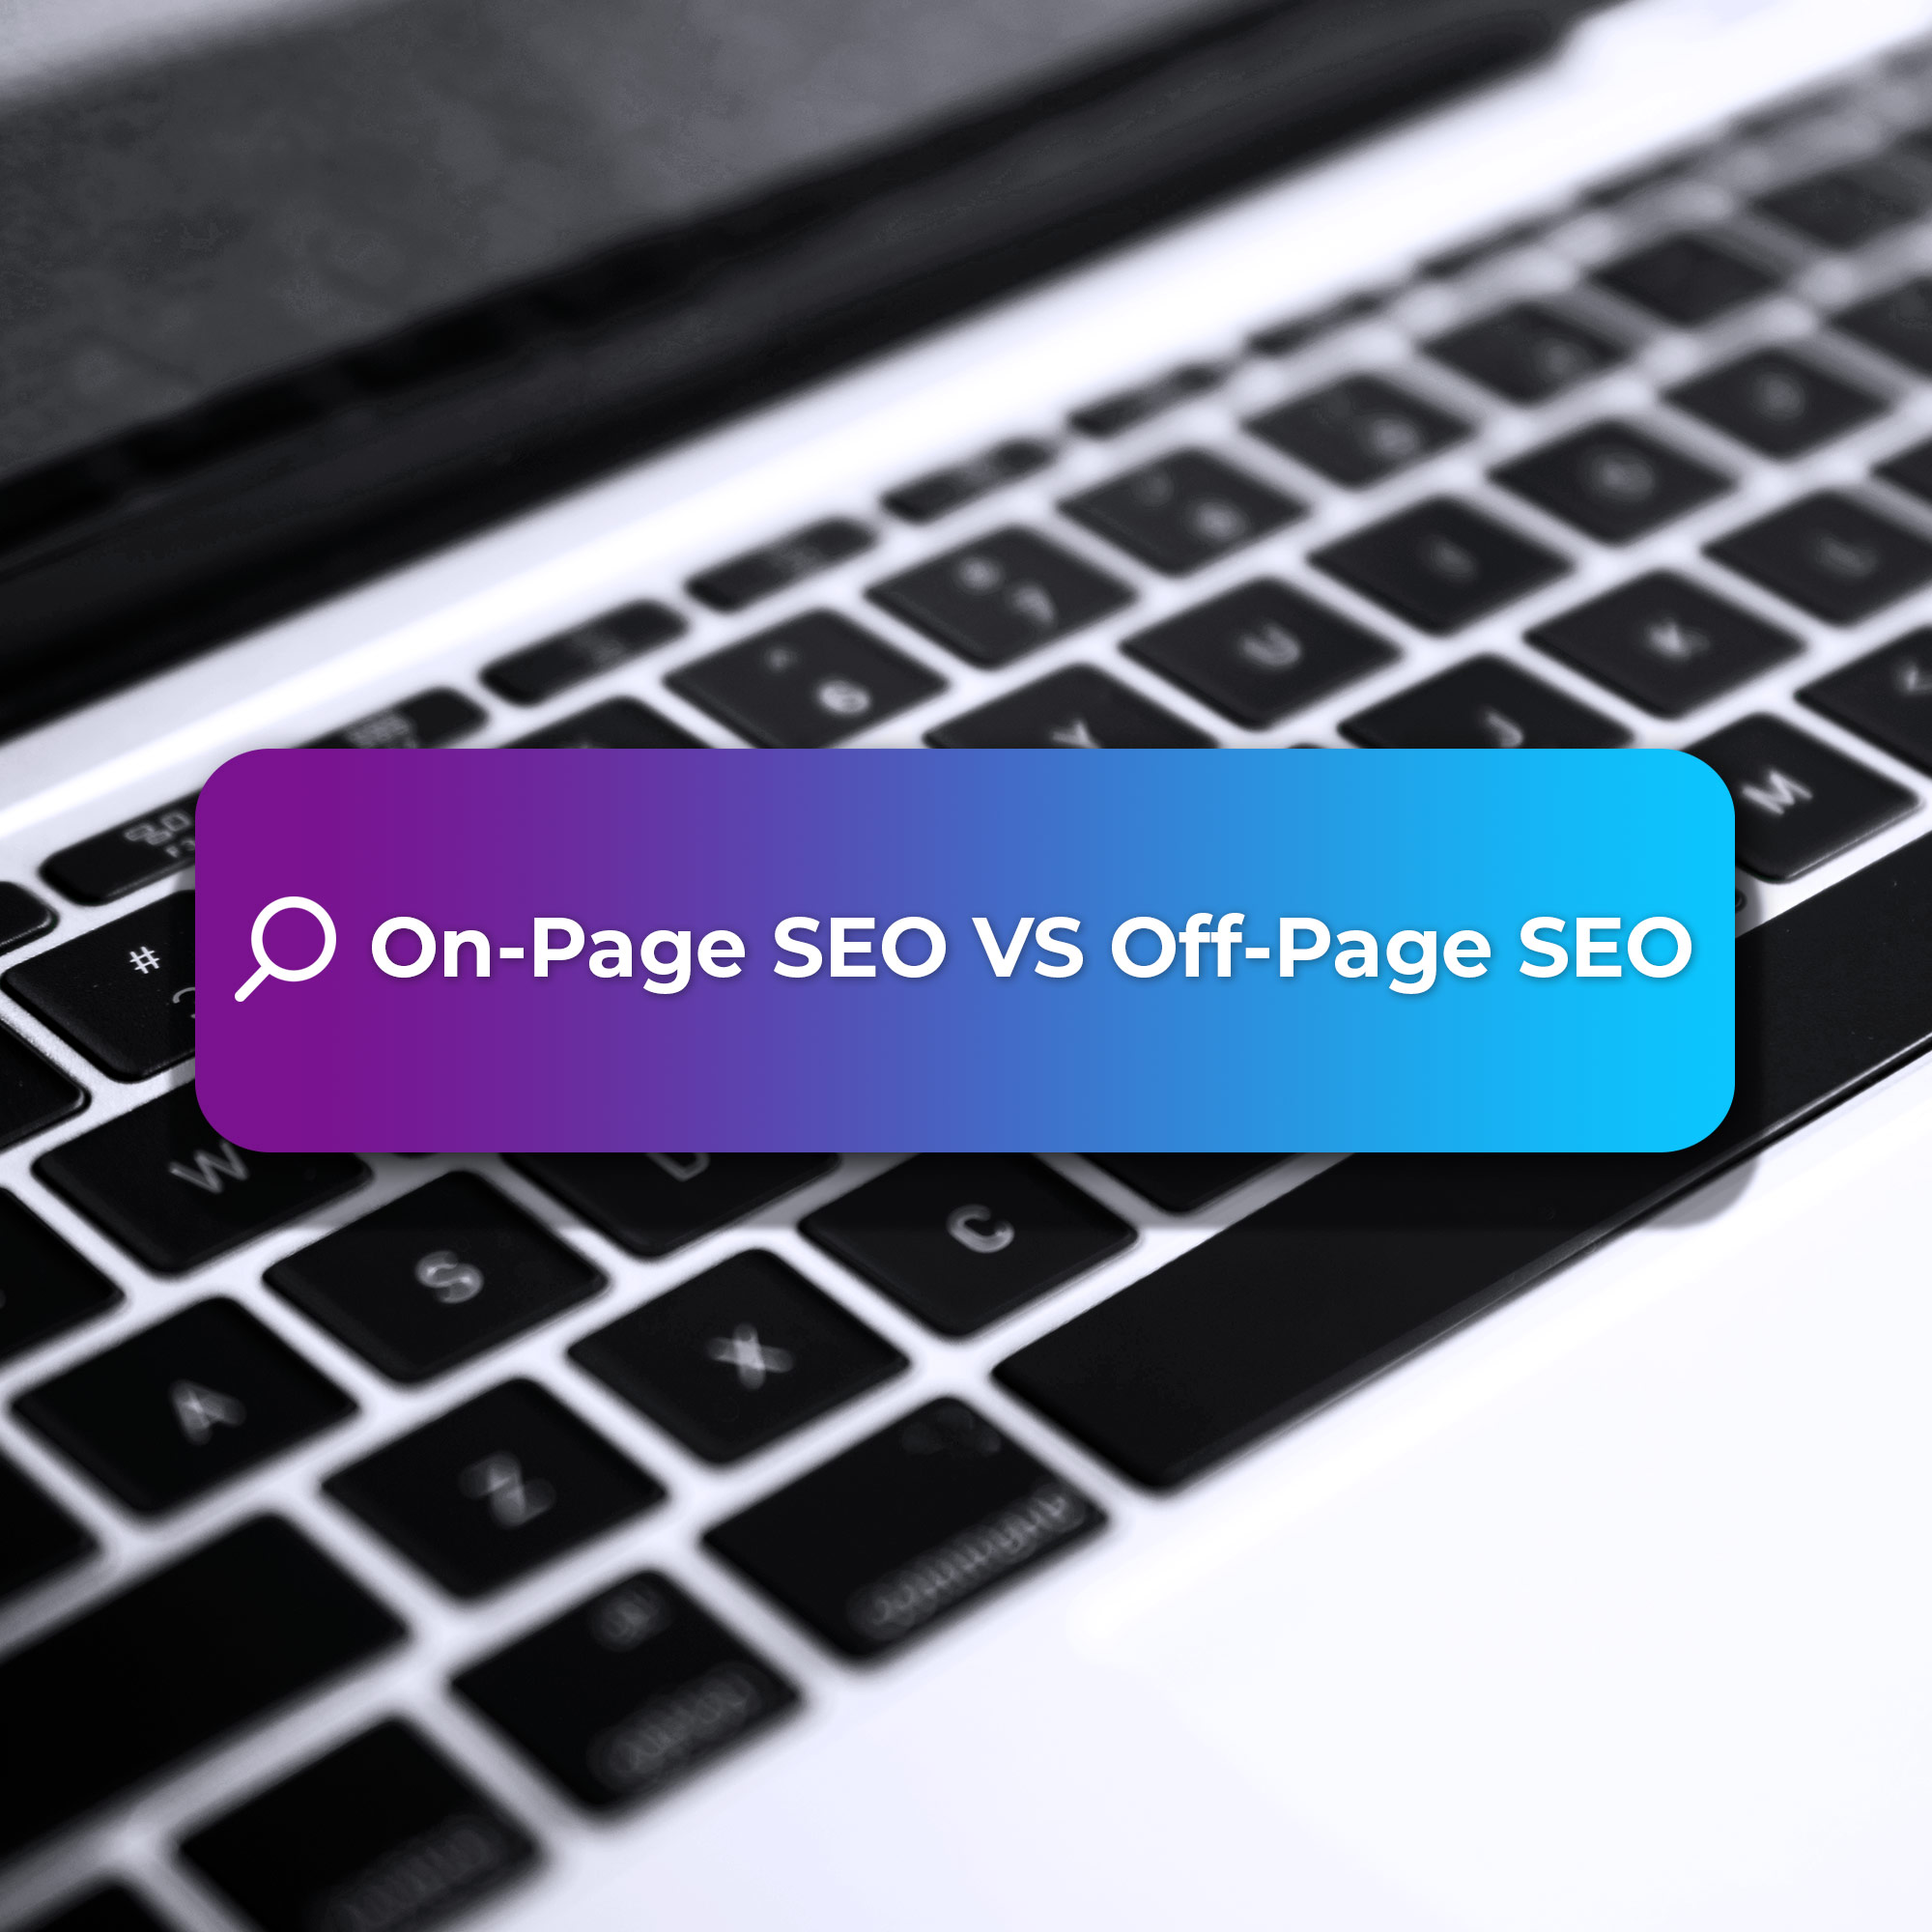 On-Page SEO Vs Off-Page SEO: What’s The Difference?